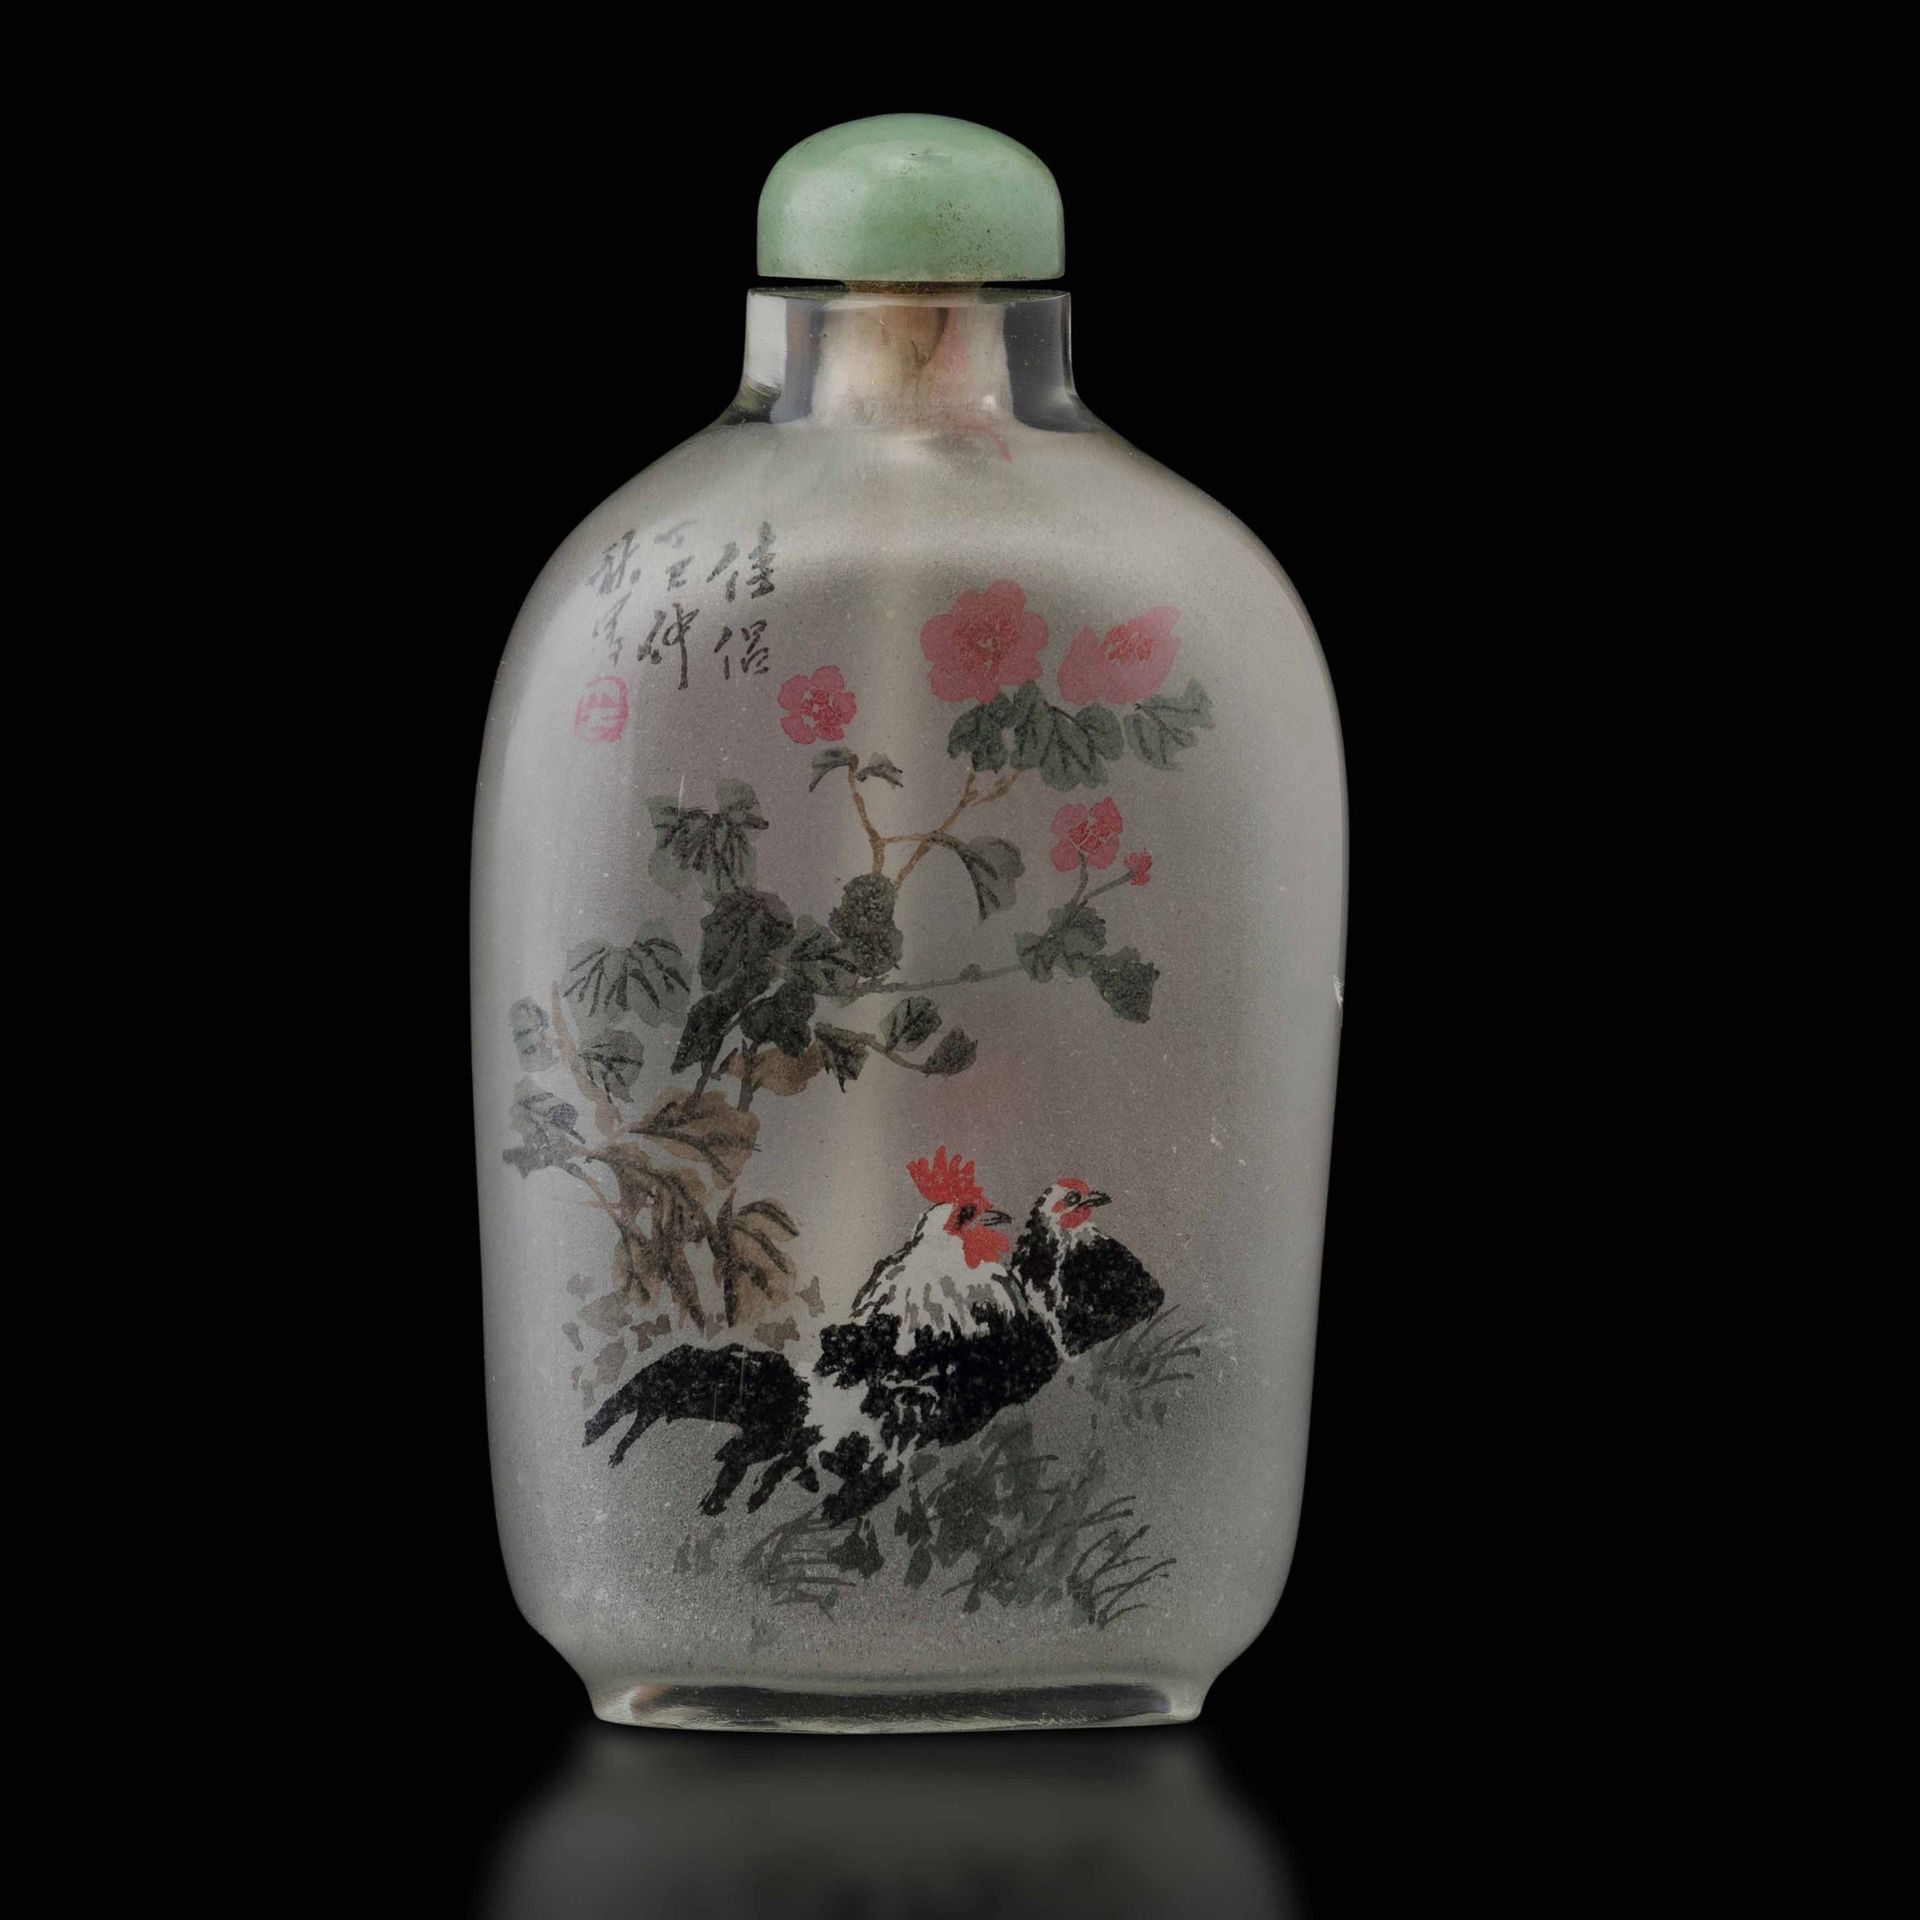 A glass snuff bottle, China, early 1900s H 8,5 cm